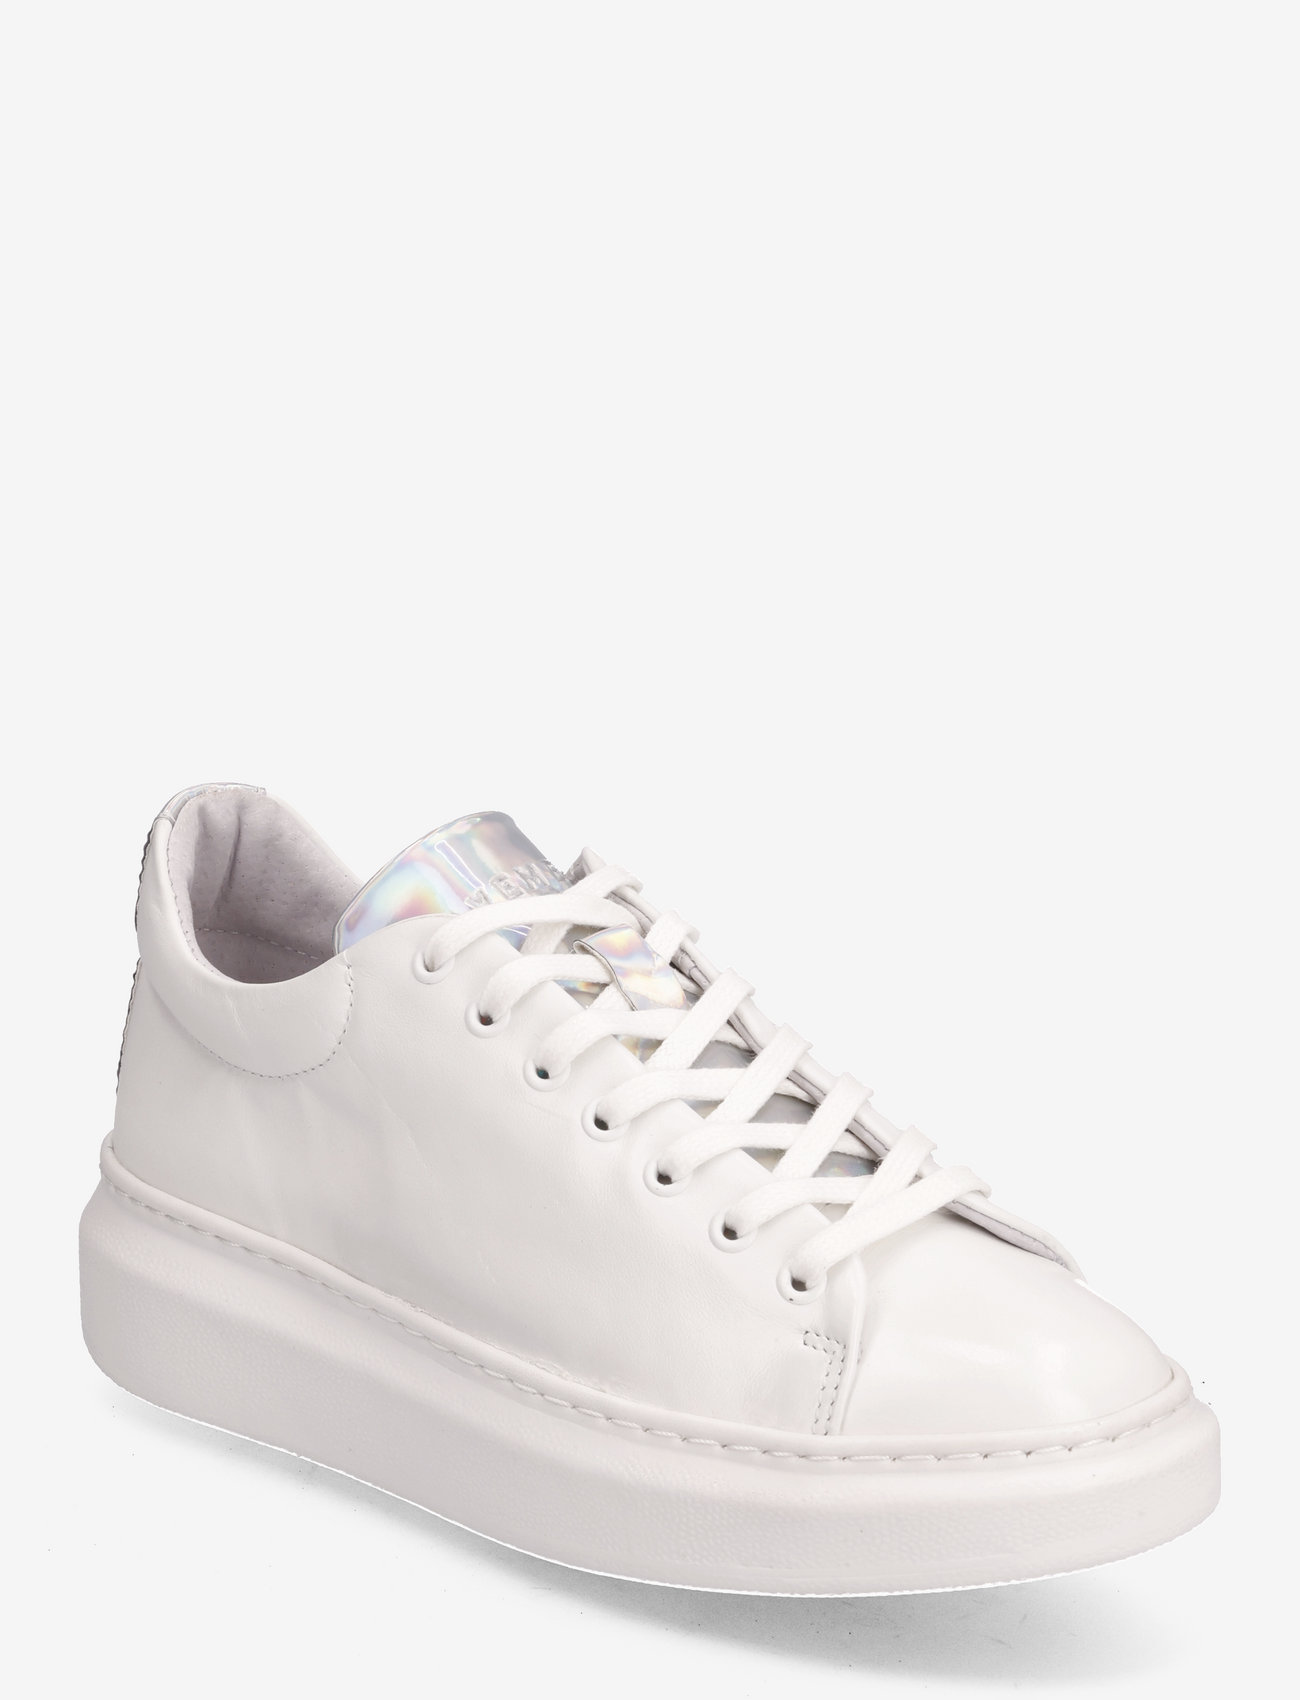 Pavement - Dee Holographic - low top sneakers - white/pink - 0